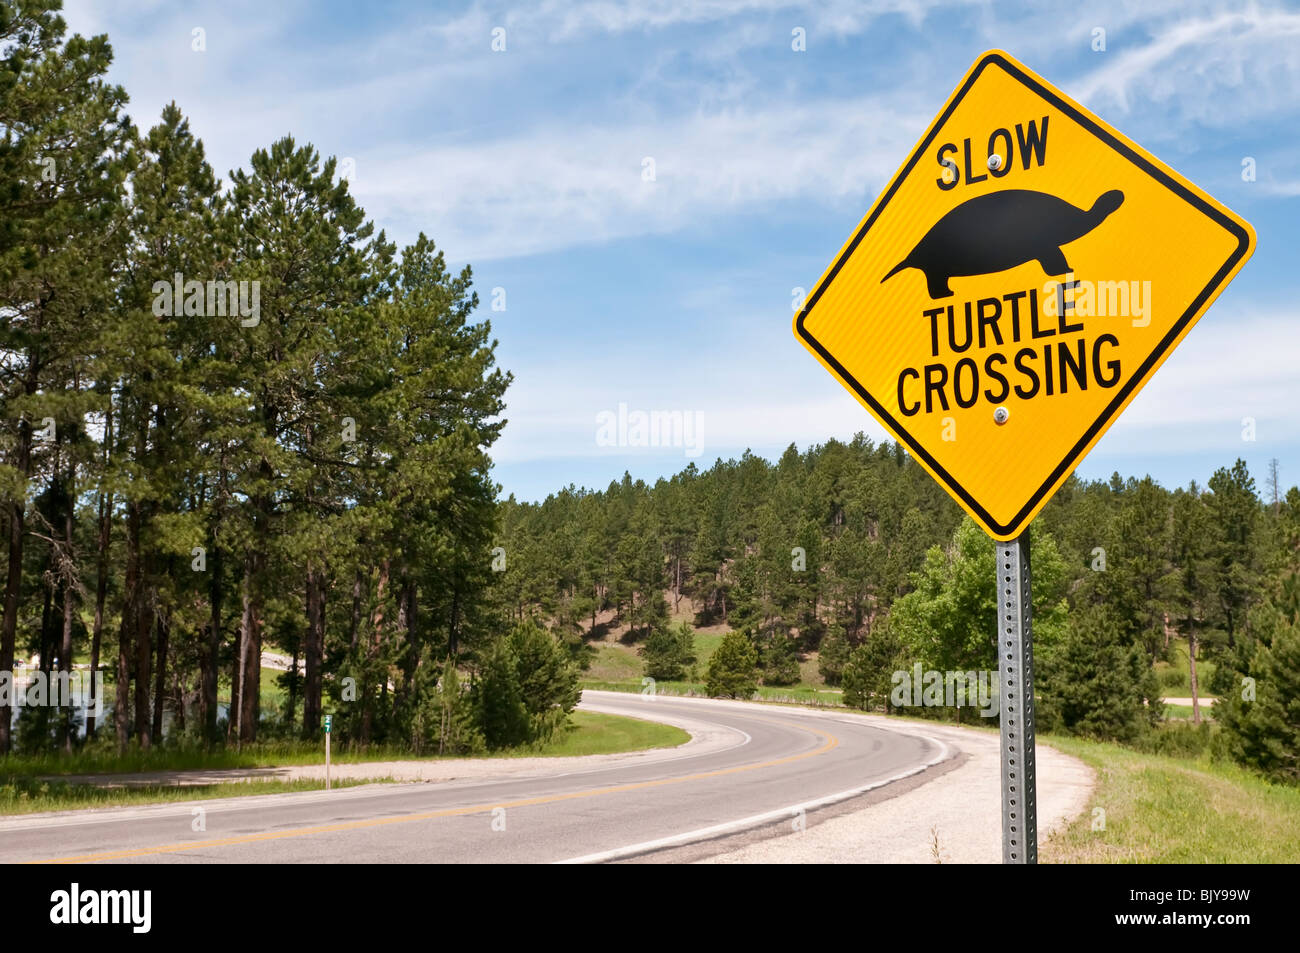 Turtle crossing sign à Stockade Lake, Custer State Park, South Dakota, USA Banque D'Images